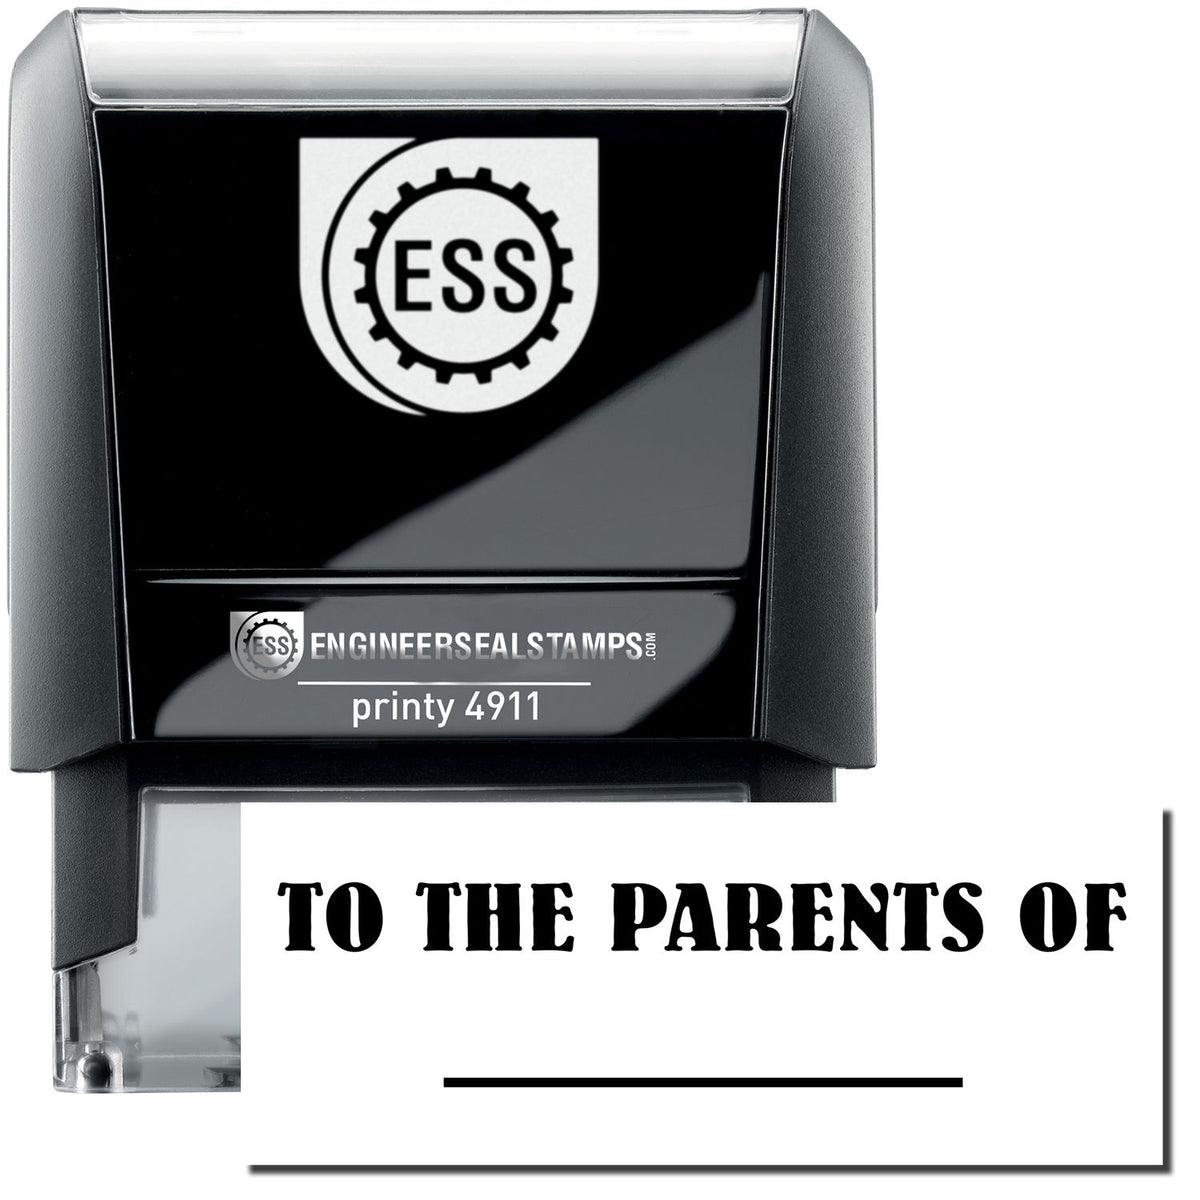 A self-inking stamp with a stamped image showing how the text &quot;TO THE PARENTS OF&quot; with a line under it is displayed after stamping.